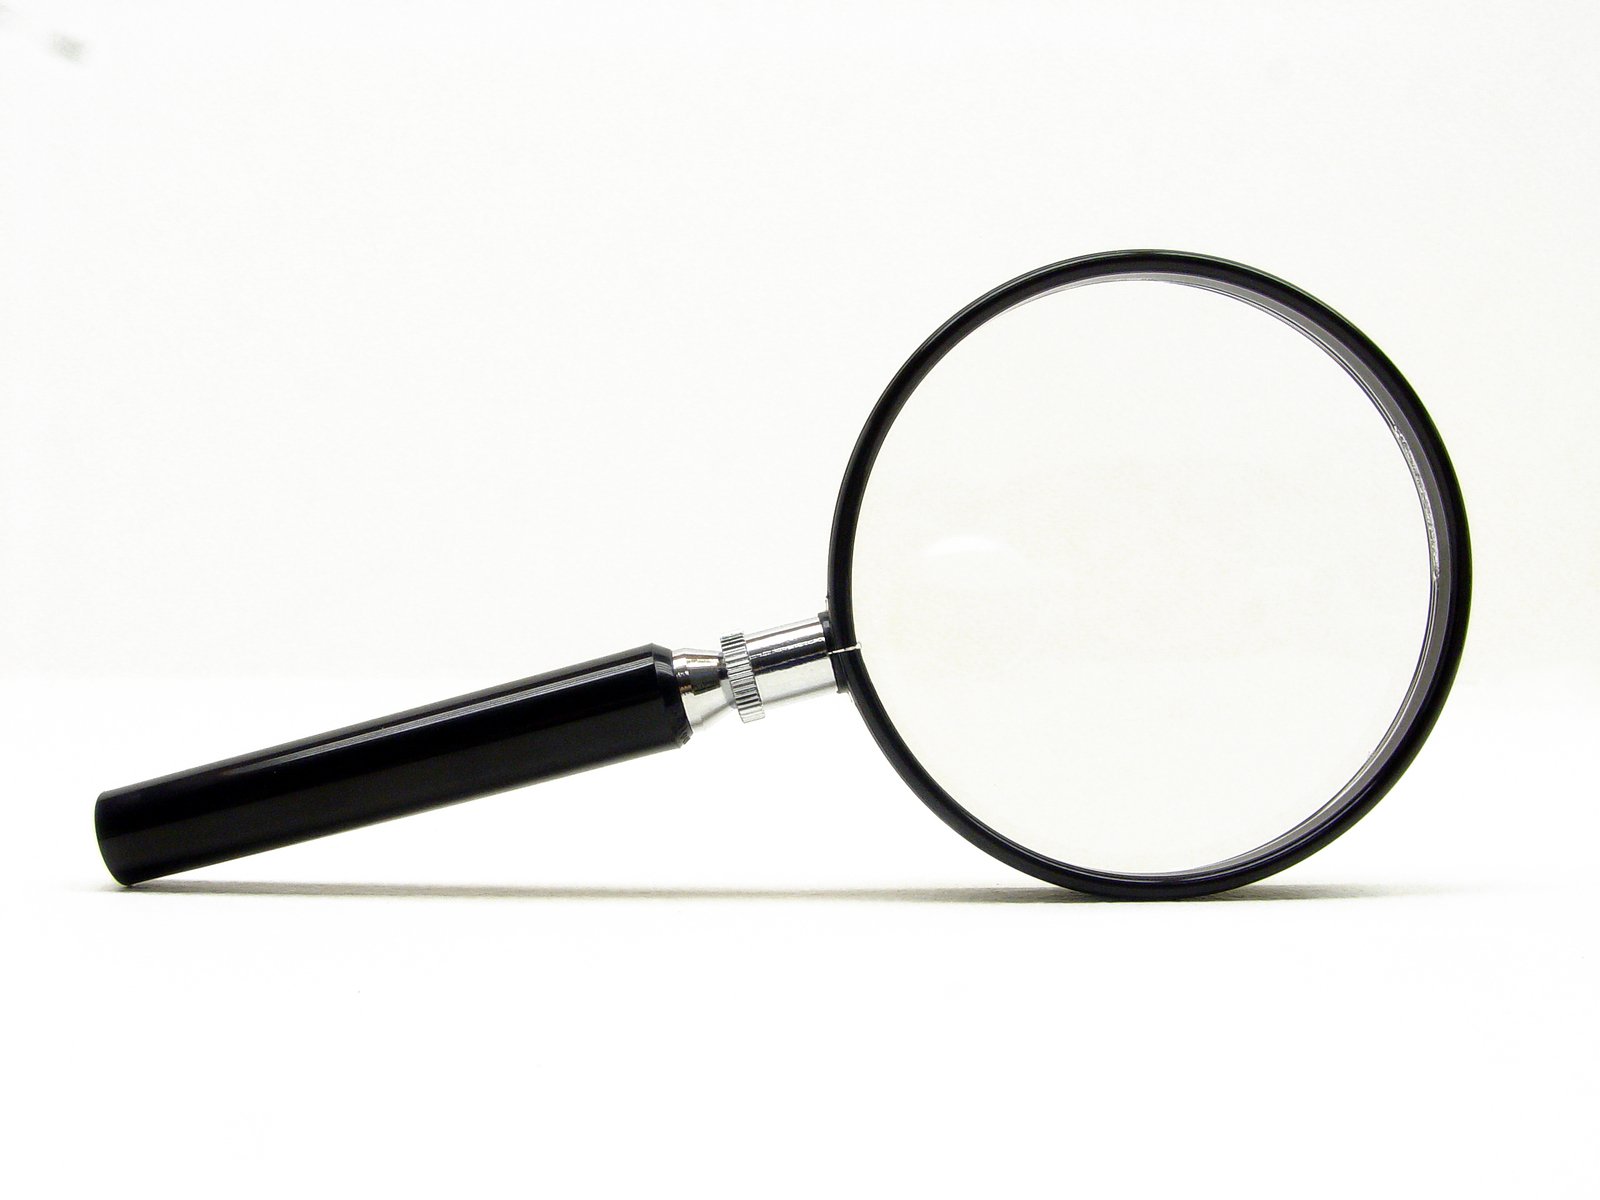 a magnifying glass is shown against a white background